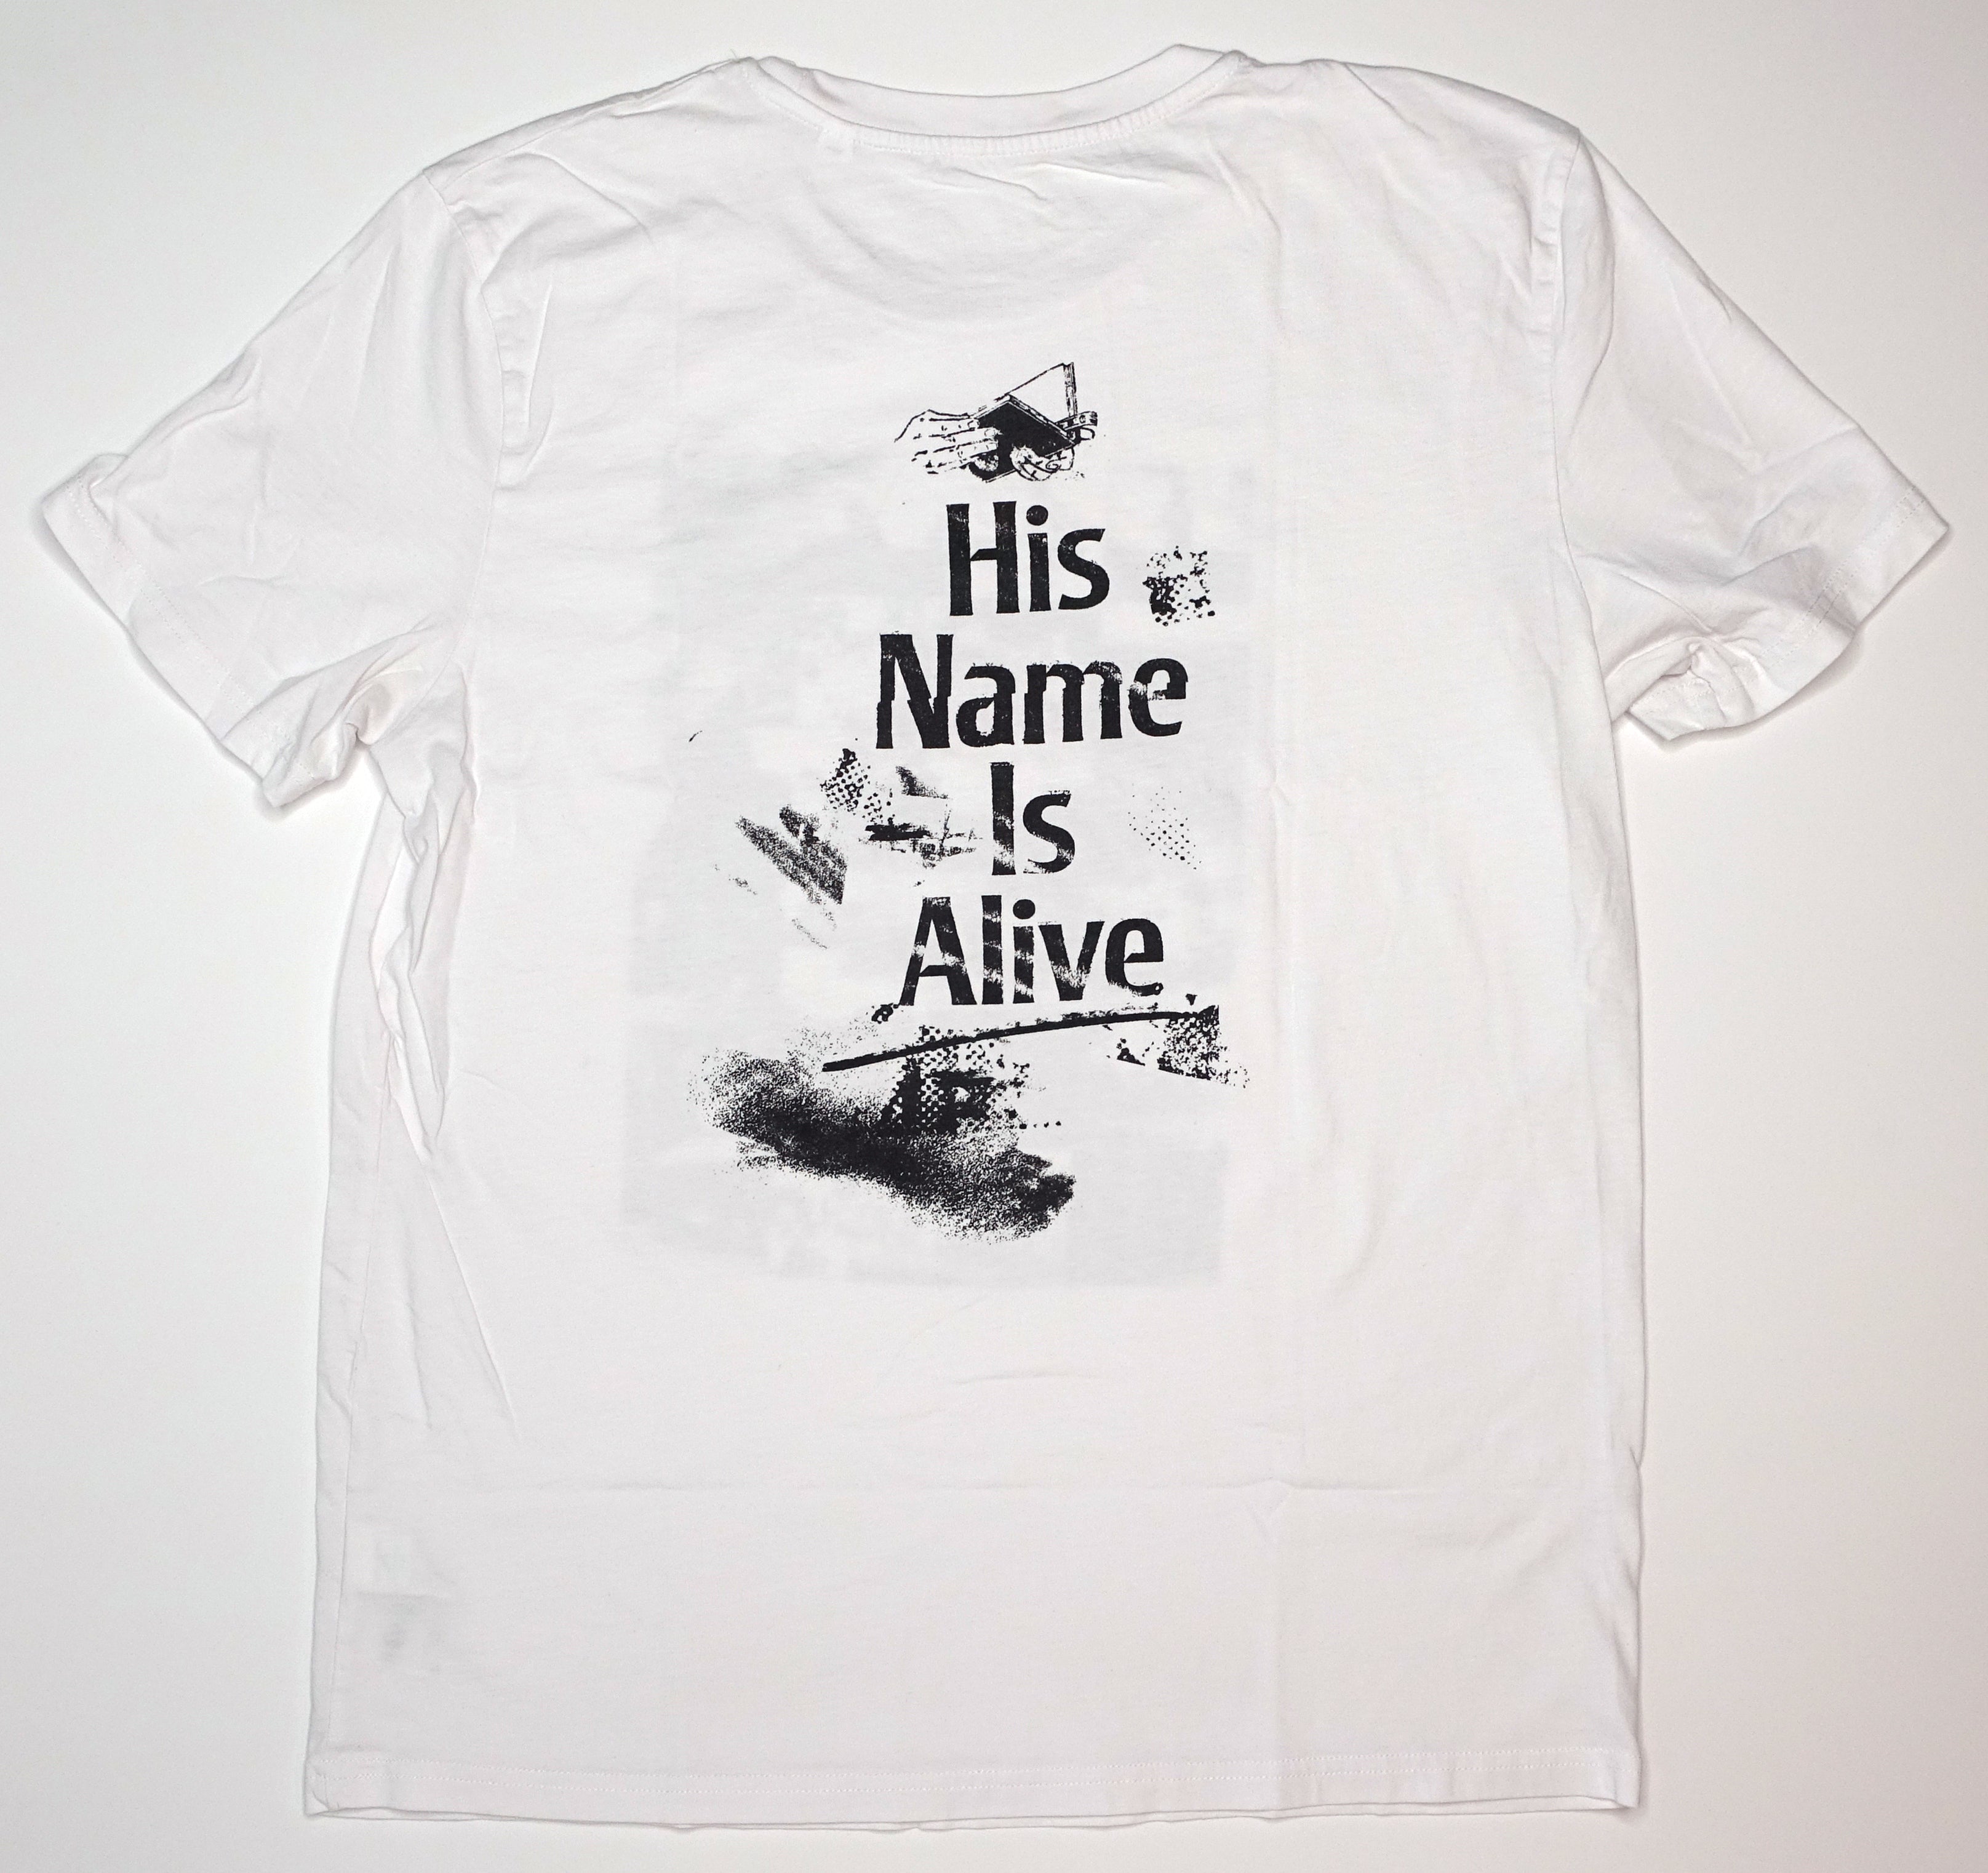 His Name Is Alive - Ghost Tape EXP 2020 Shirt Size XL